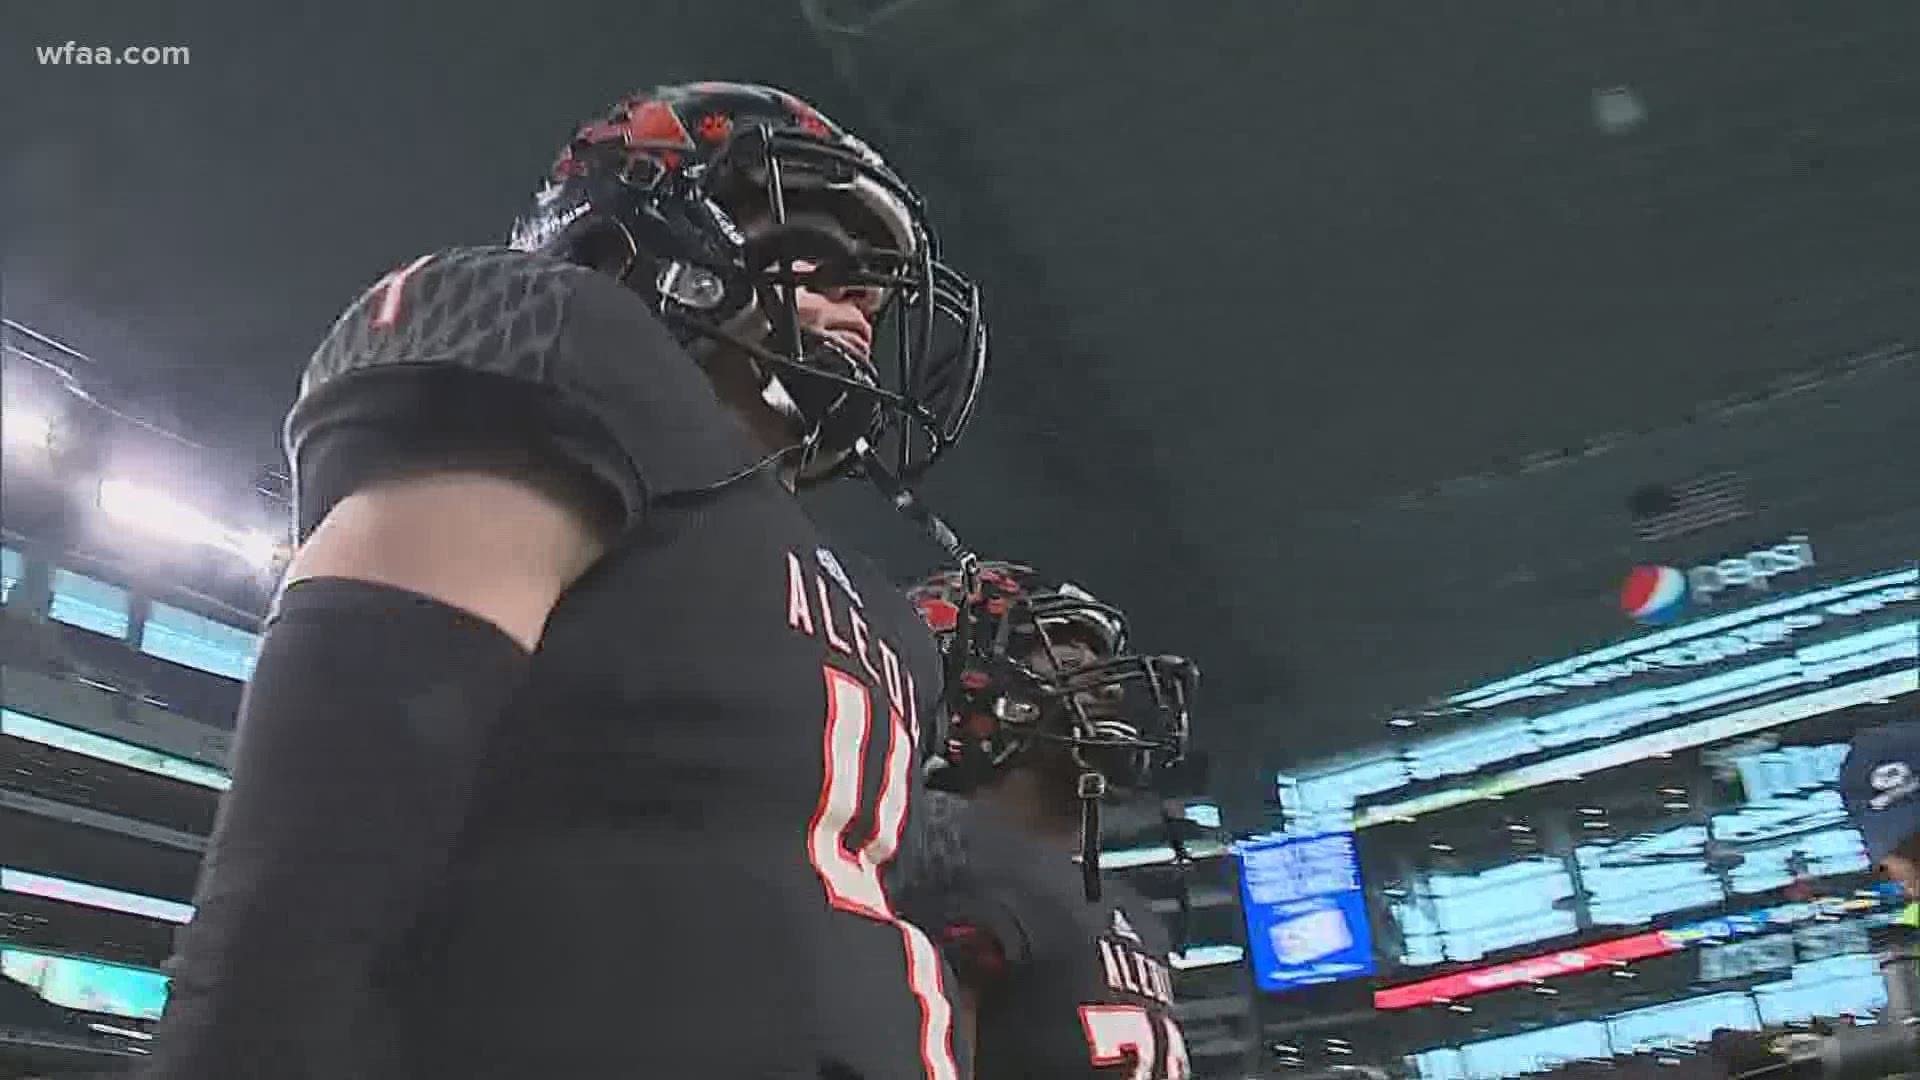 When Aledo plays Crosby for the 5A Division II state title Friday, they have a shot to set a new championship standard in Texas high school football.